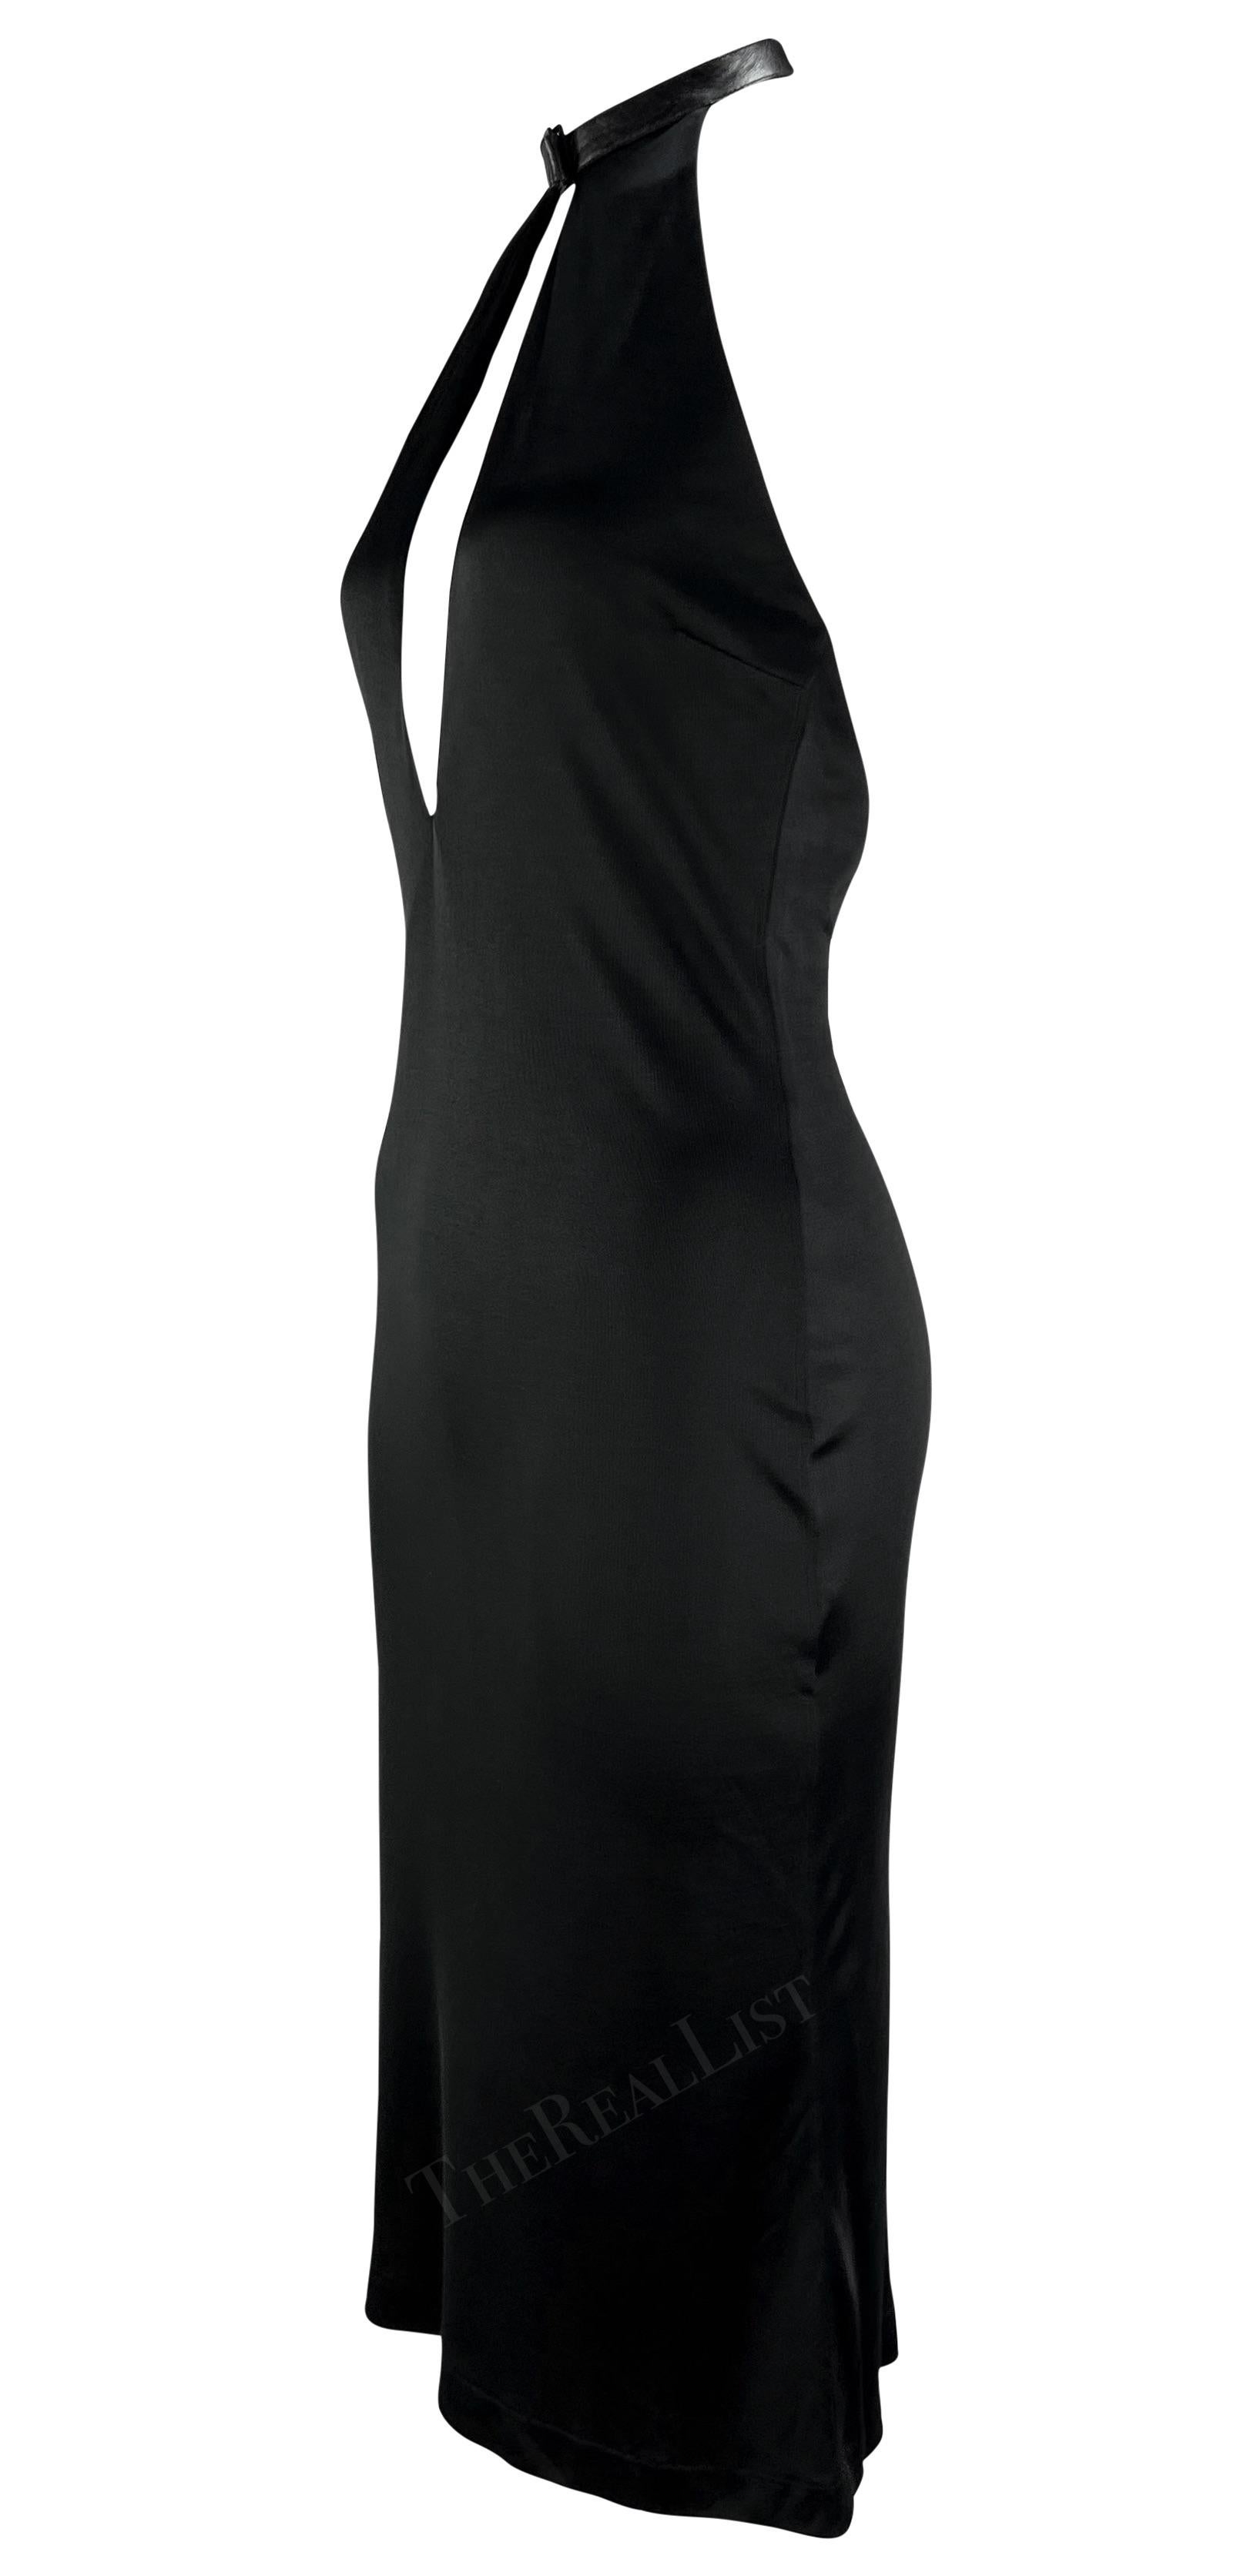 Women's S/S 2001 Gucci by Tom Ford Black Leather Halter Strap Plunging Backless Dress For Sale